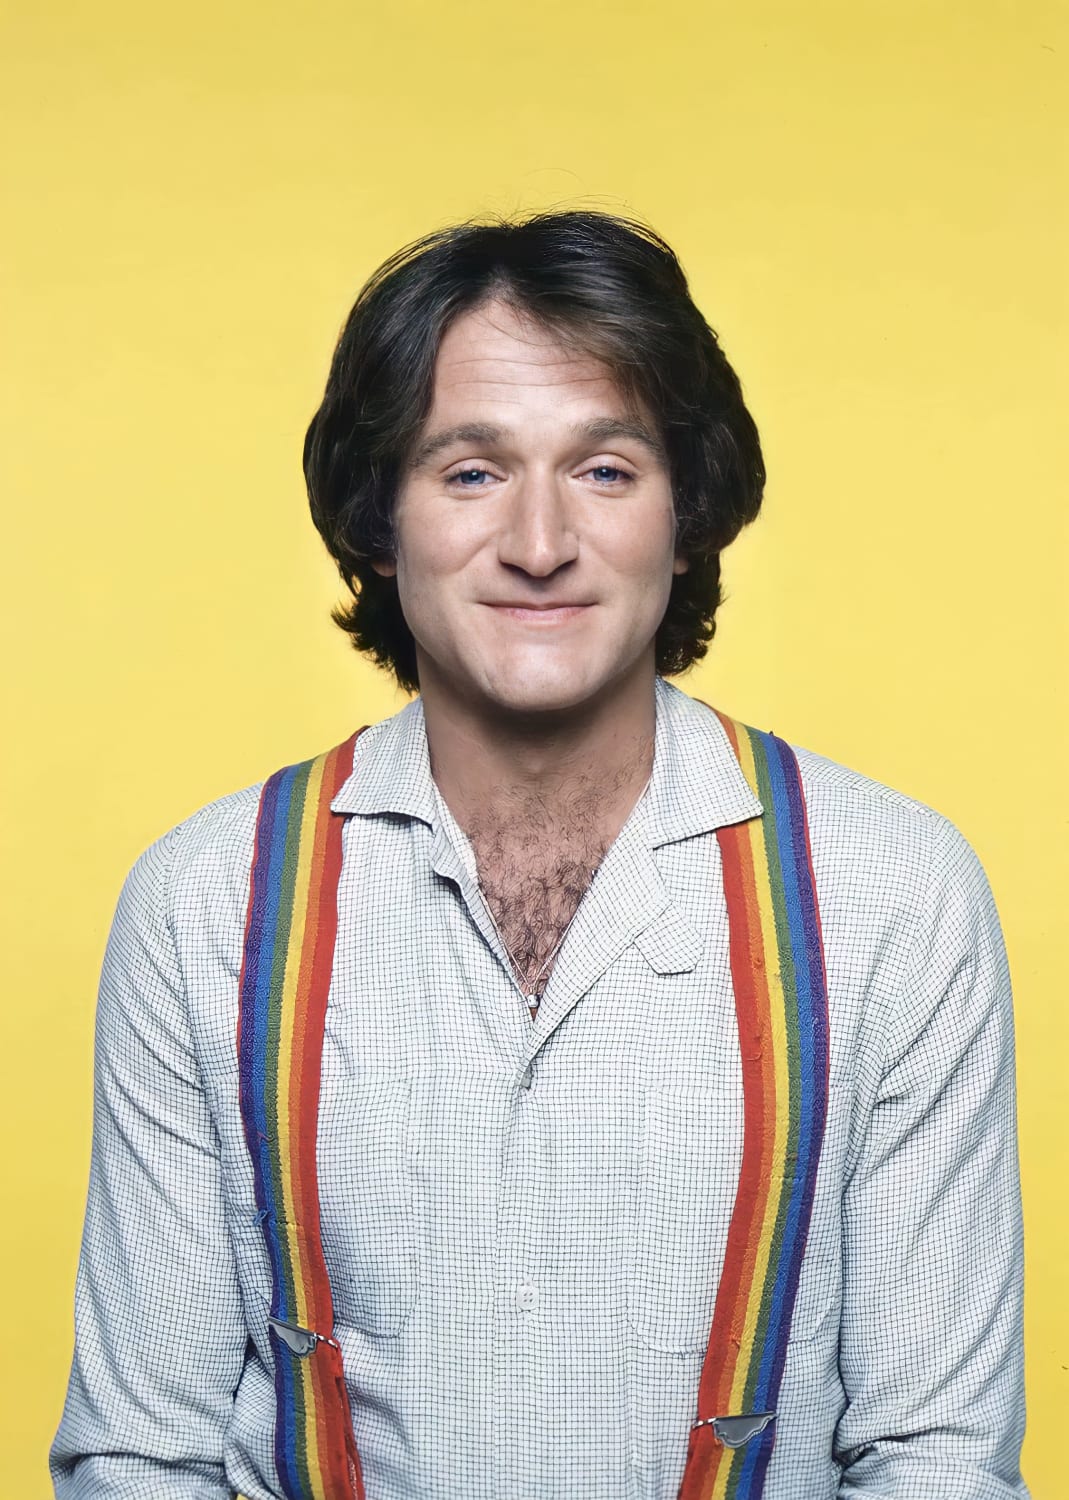 This Man whose kept me laughing through the darkest times in my life. Robin Williams, 1978